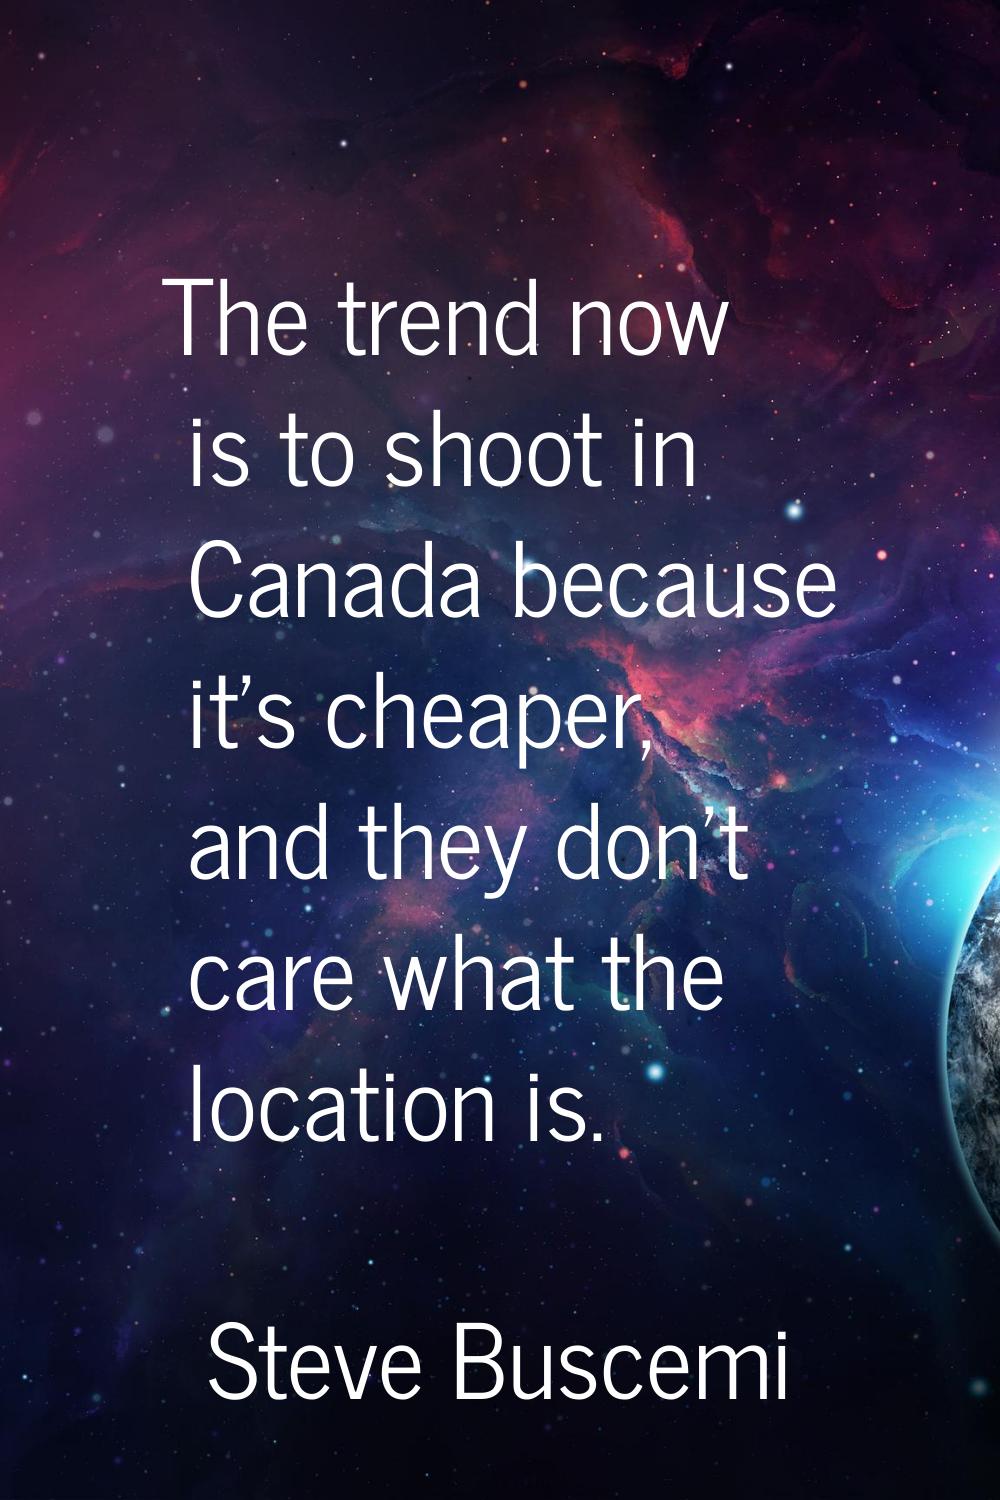 The trend now is to shoot in Canada because it's cheaper, and they don't care what the location is.